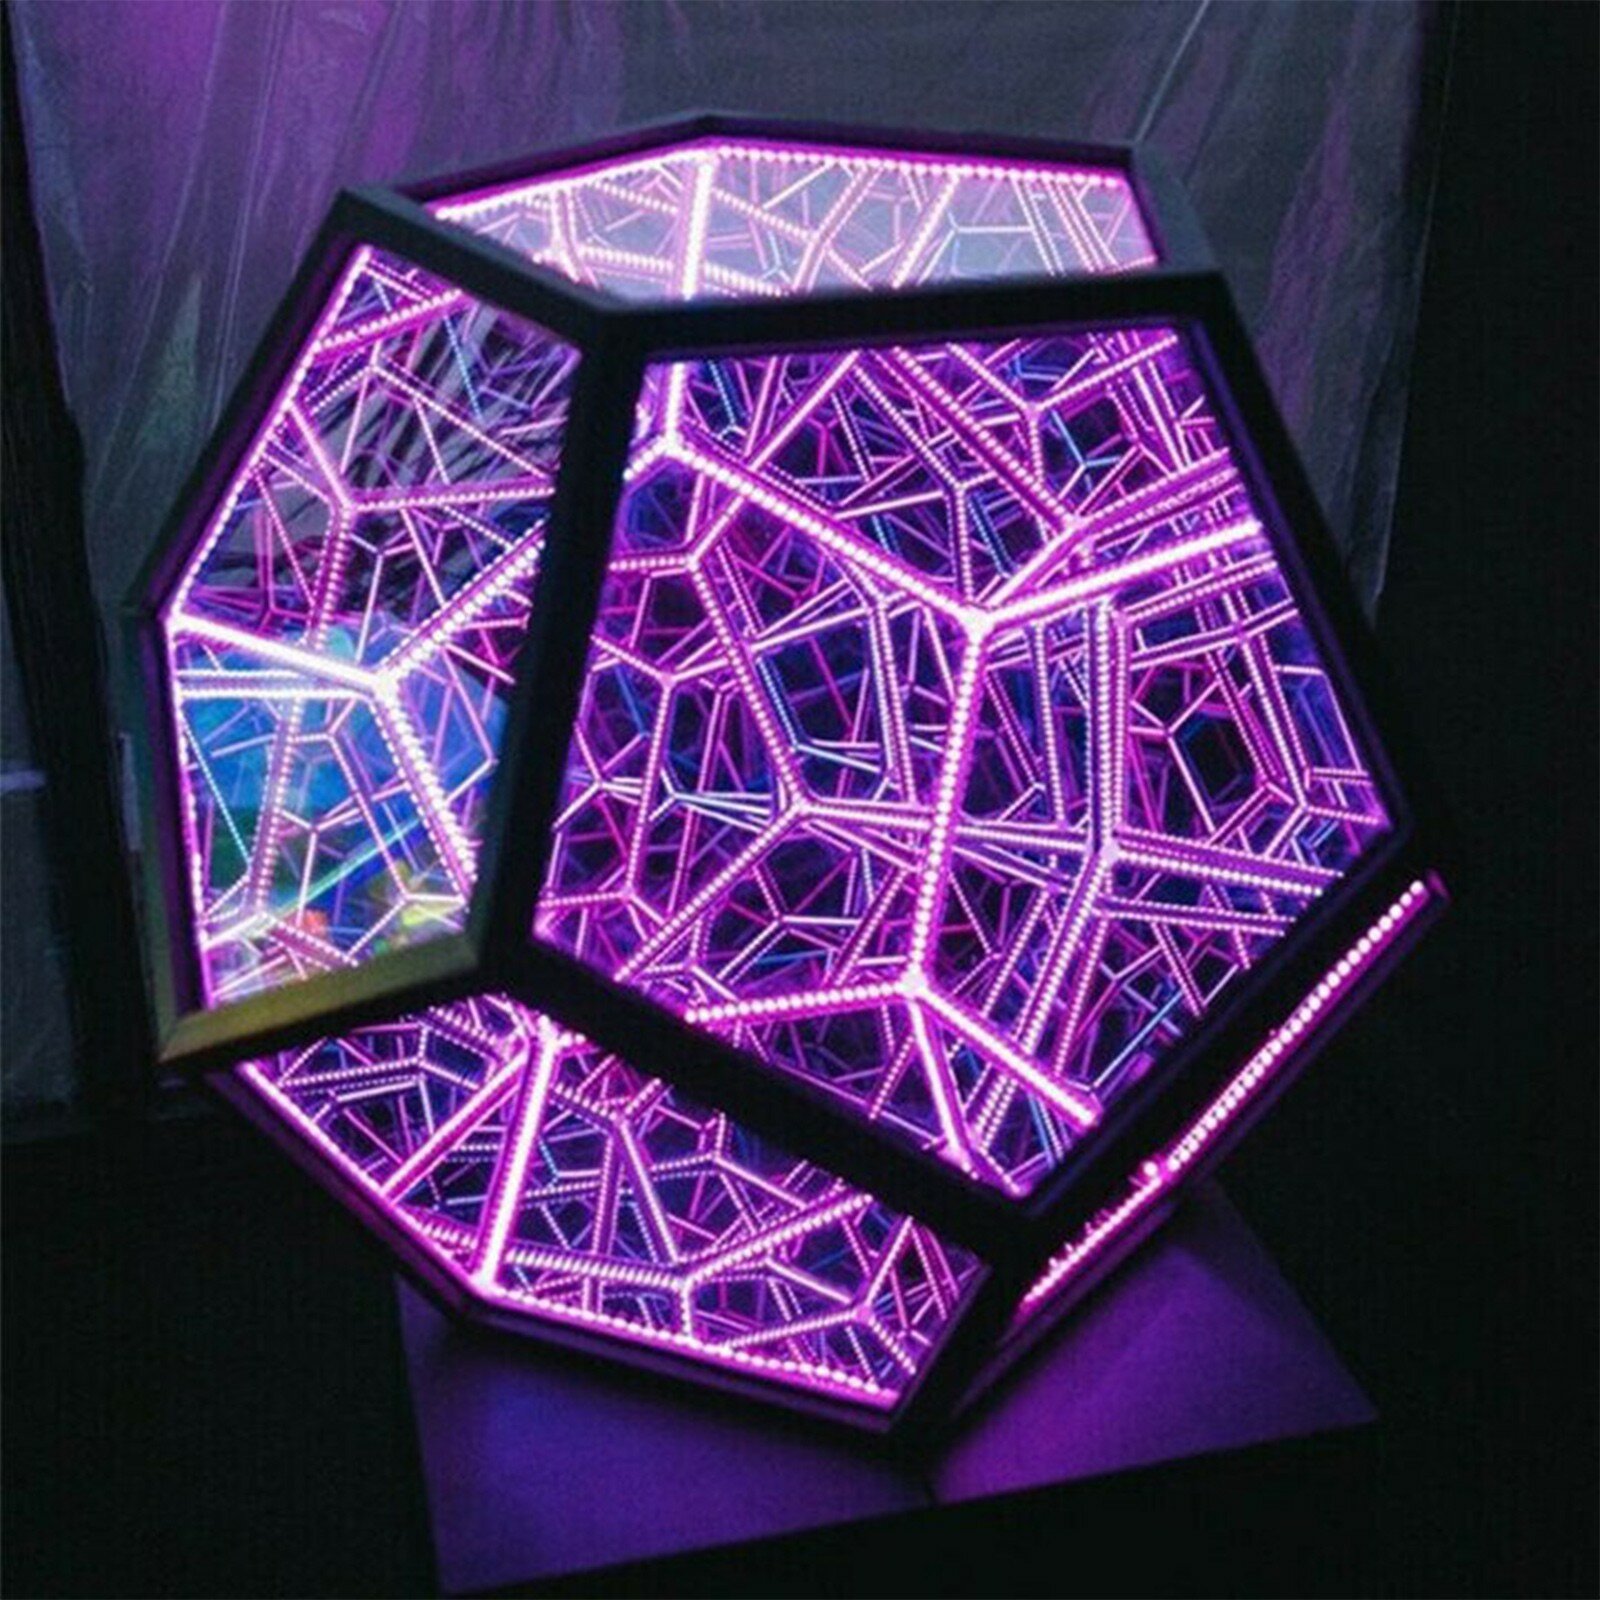 LED Night Light Infinite Dodecahedron Color Art Light Decor Novelty Christmas Gift Cool Technology D